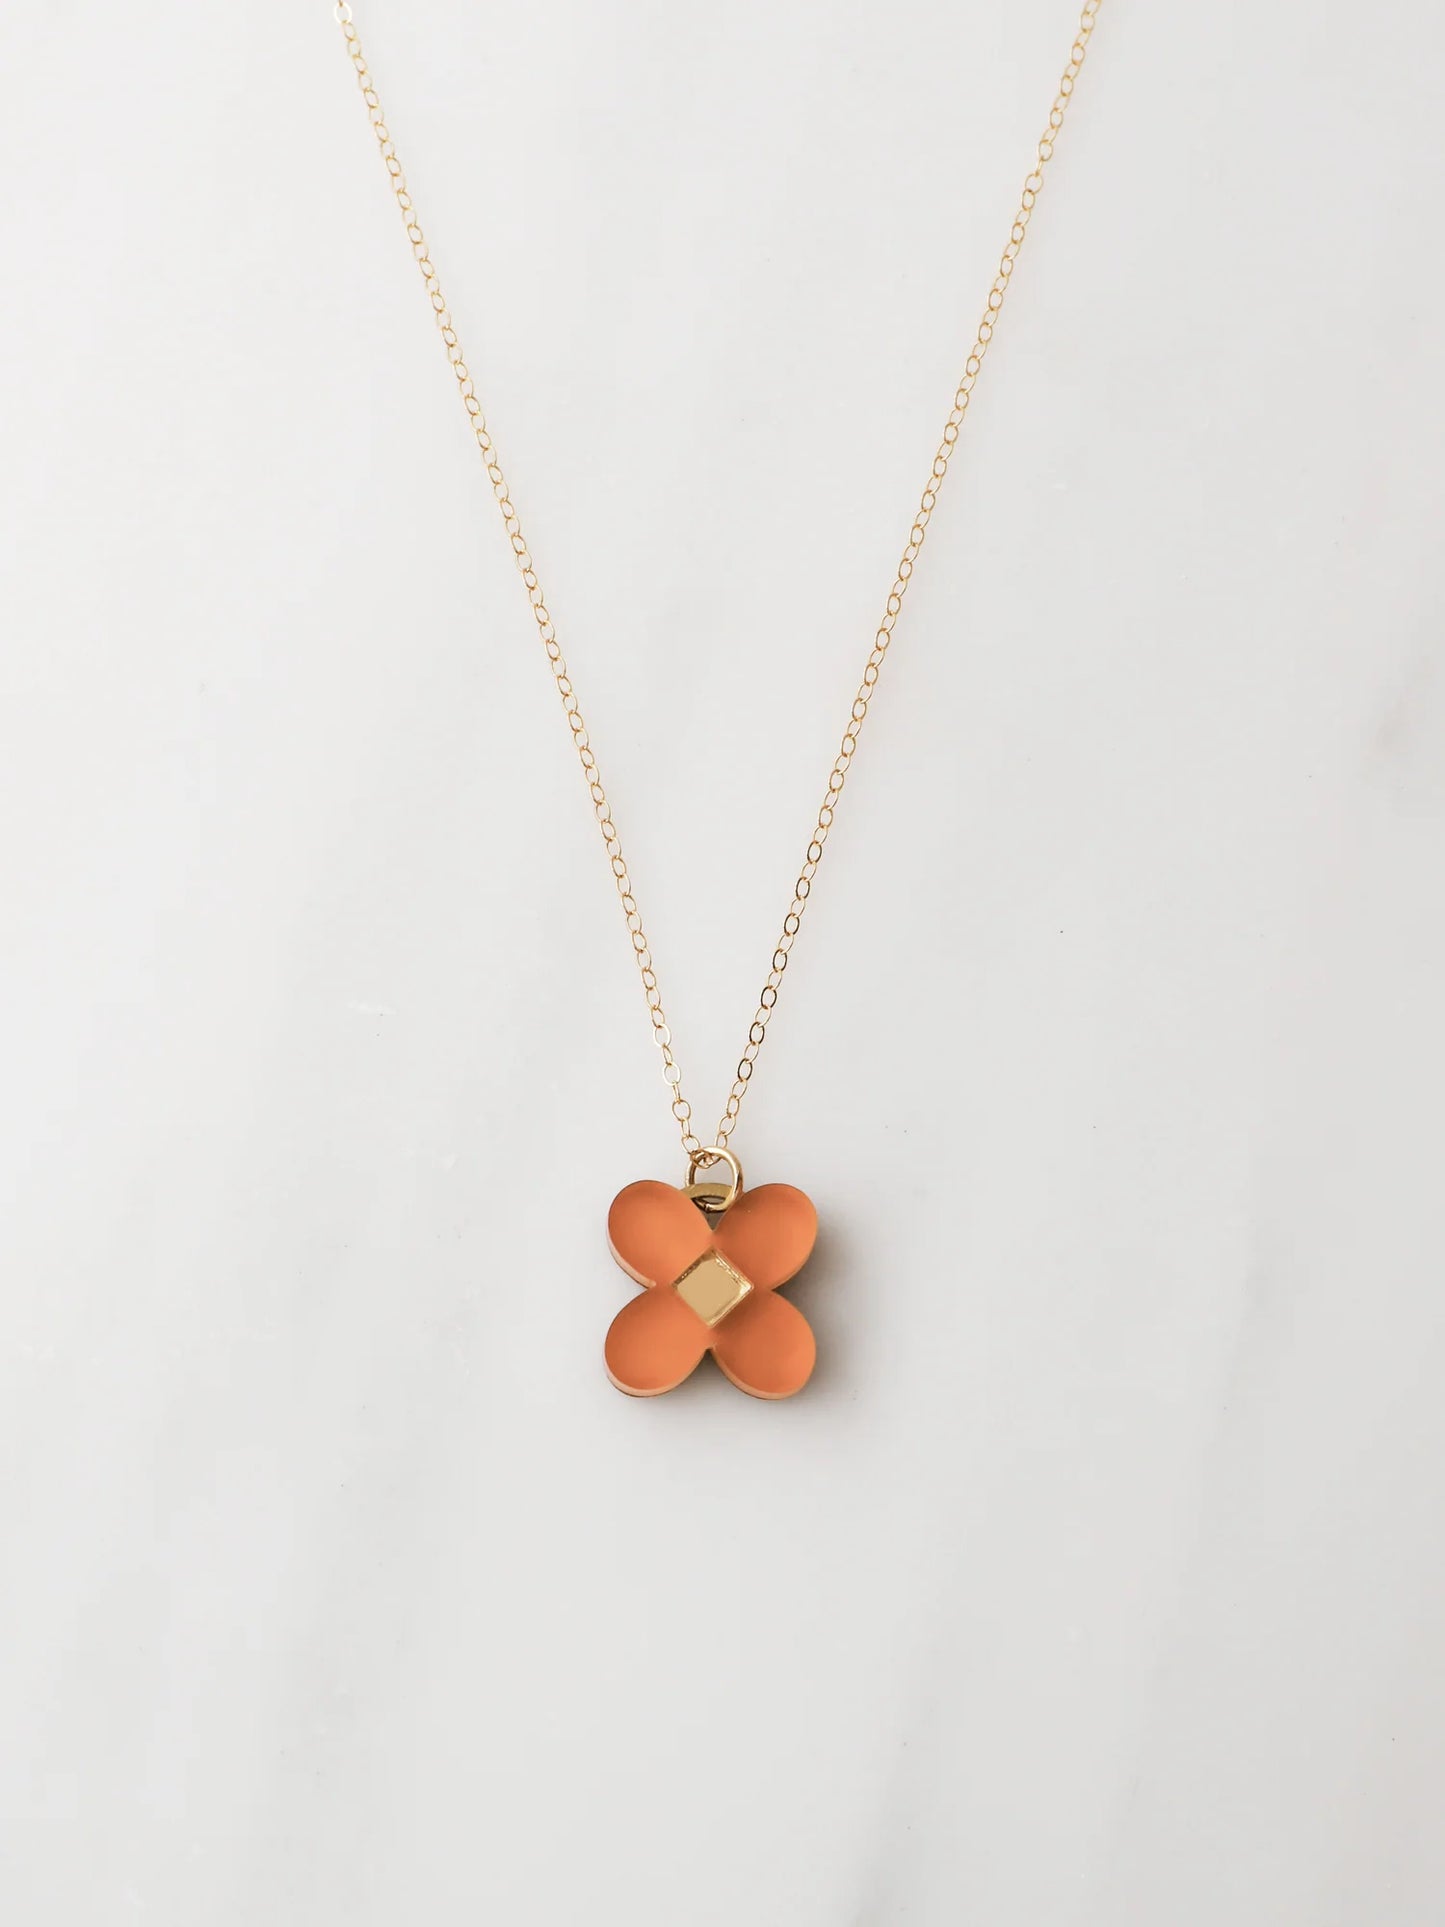 The Every Space Bella necklace with filled gold chain and terracotta acrylic pendant by Wolf & Moon